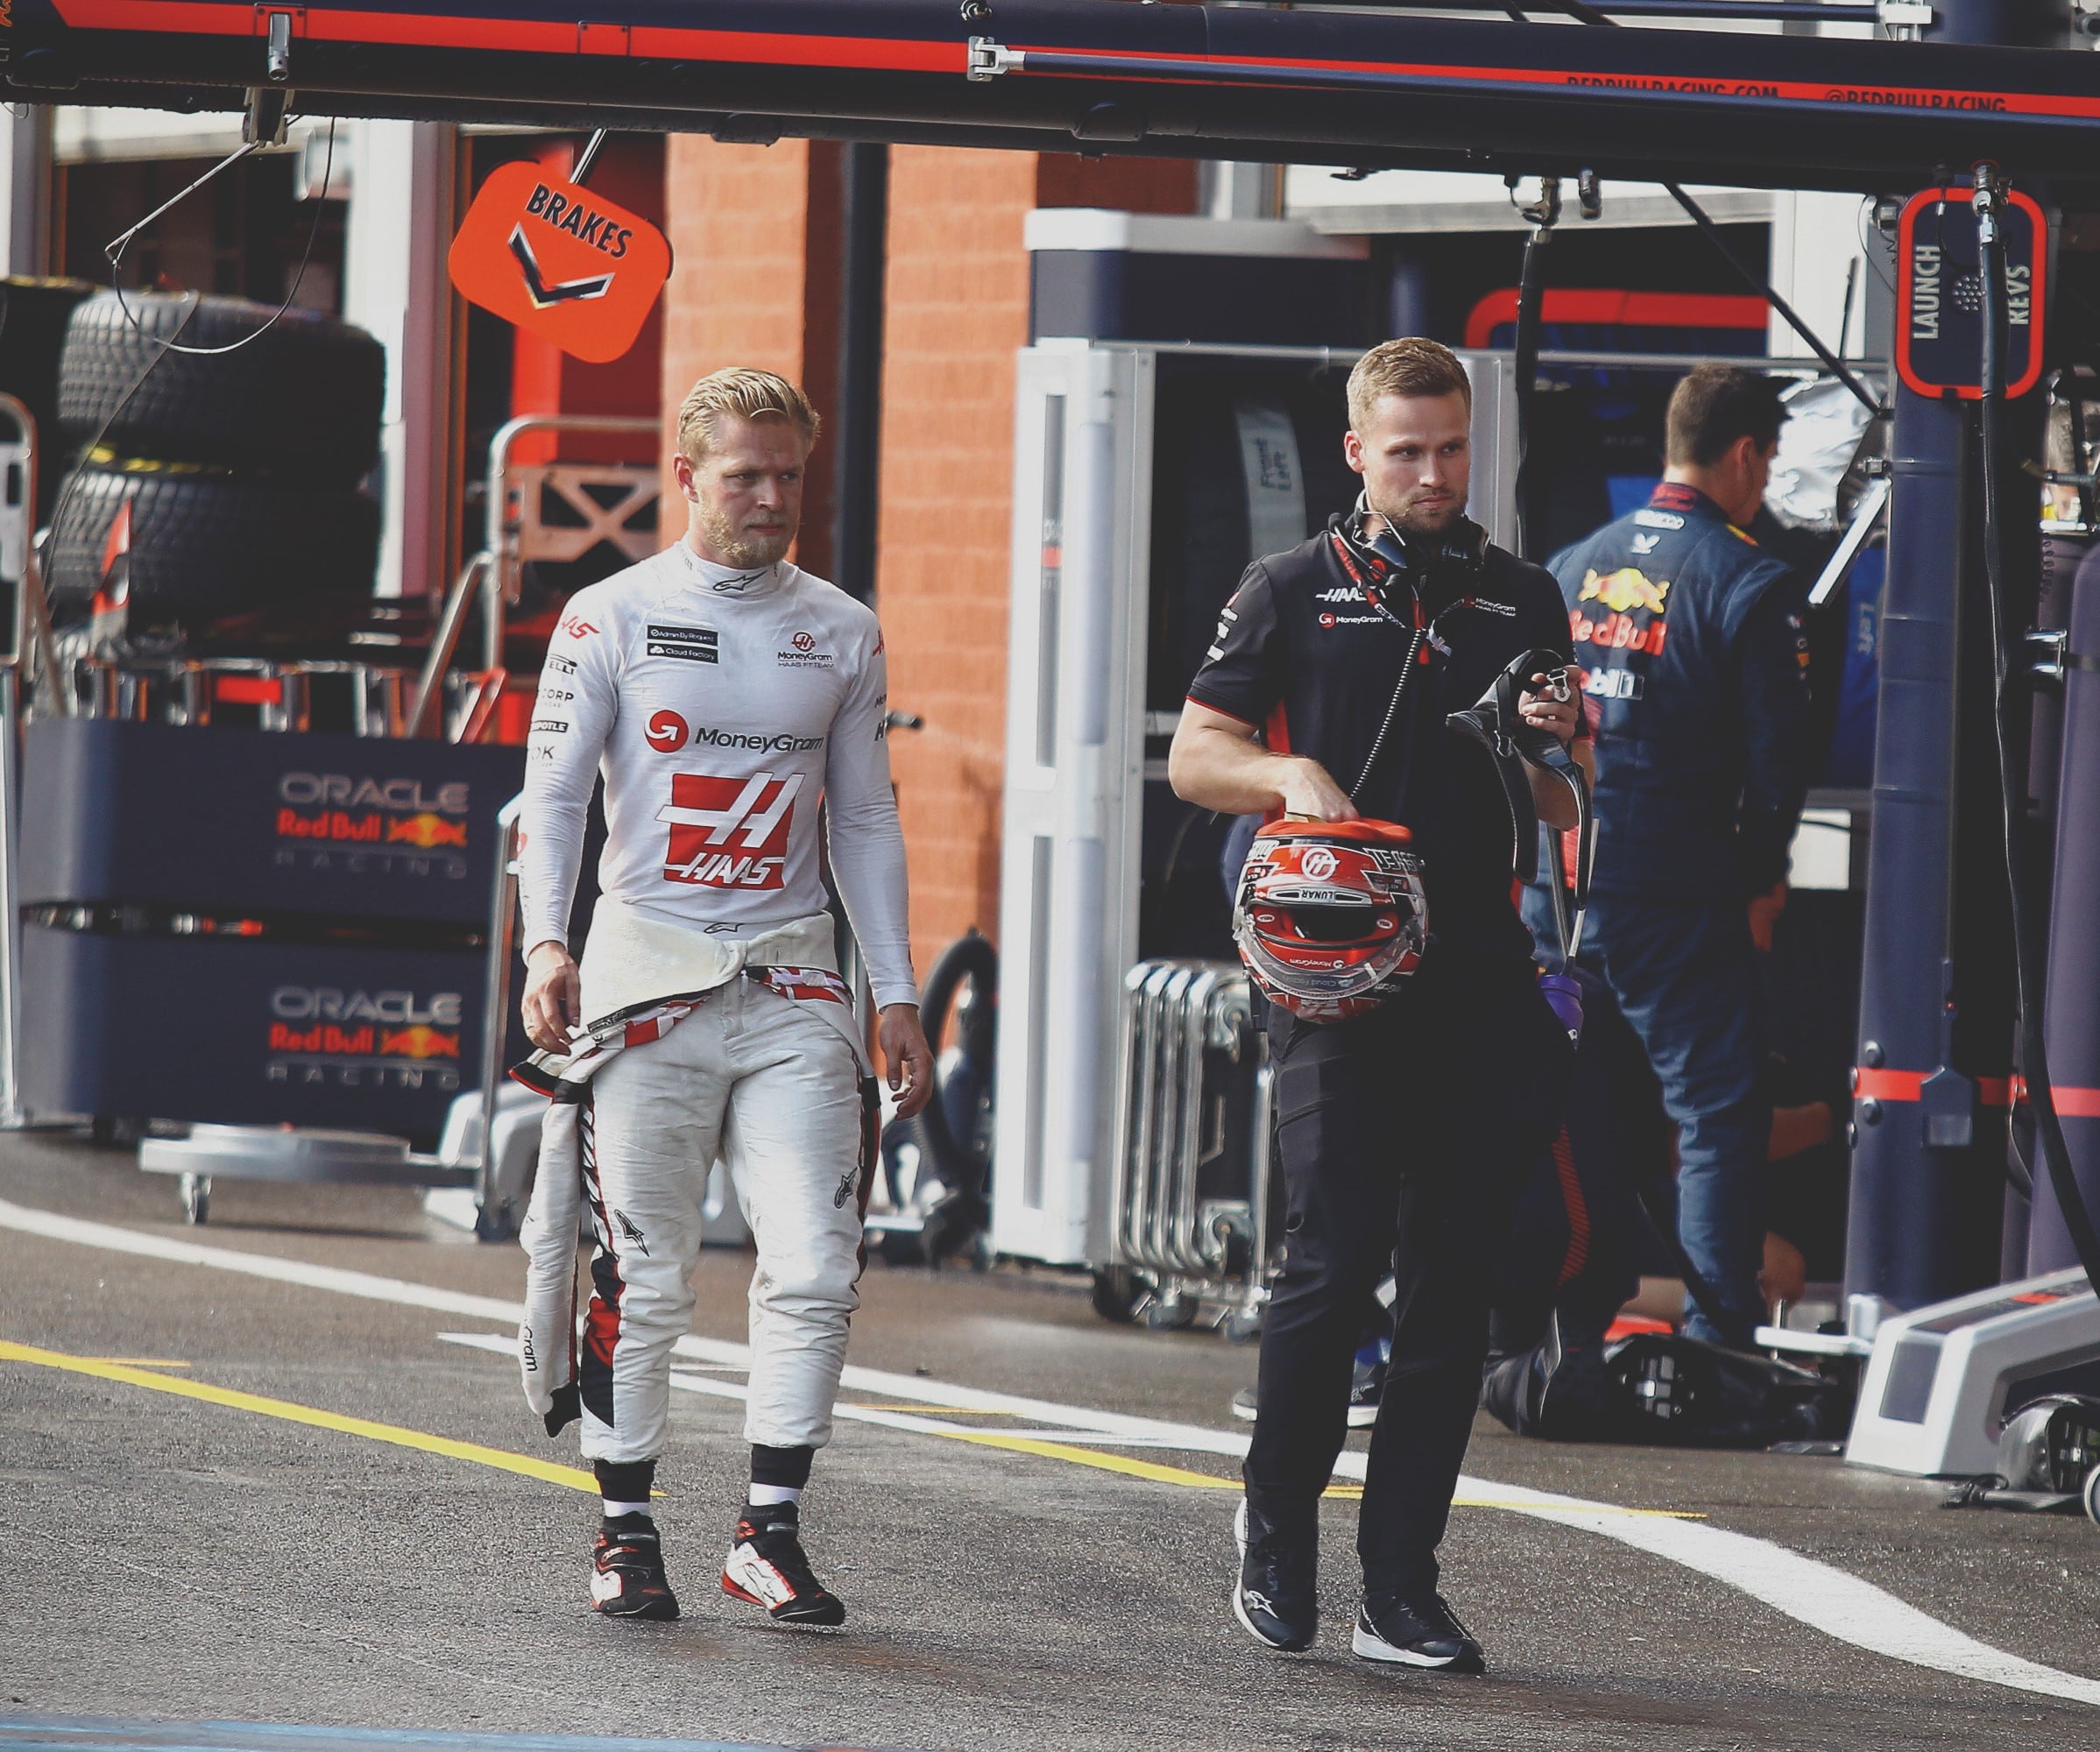 Kevin and his physio nikolaj walking in the pitlane at the belgian gp » admin by request » admin by request